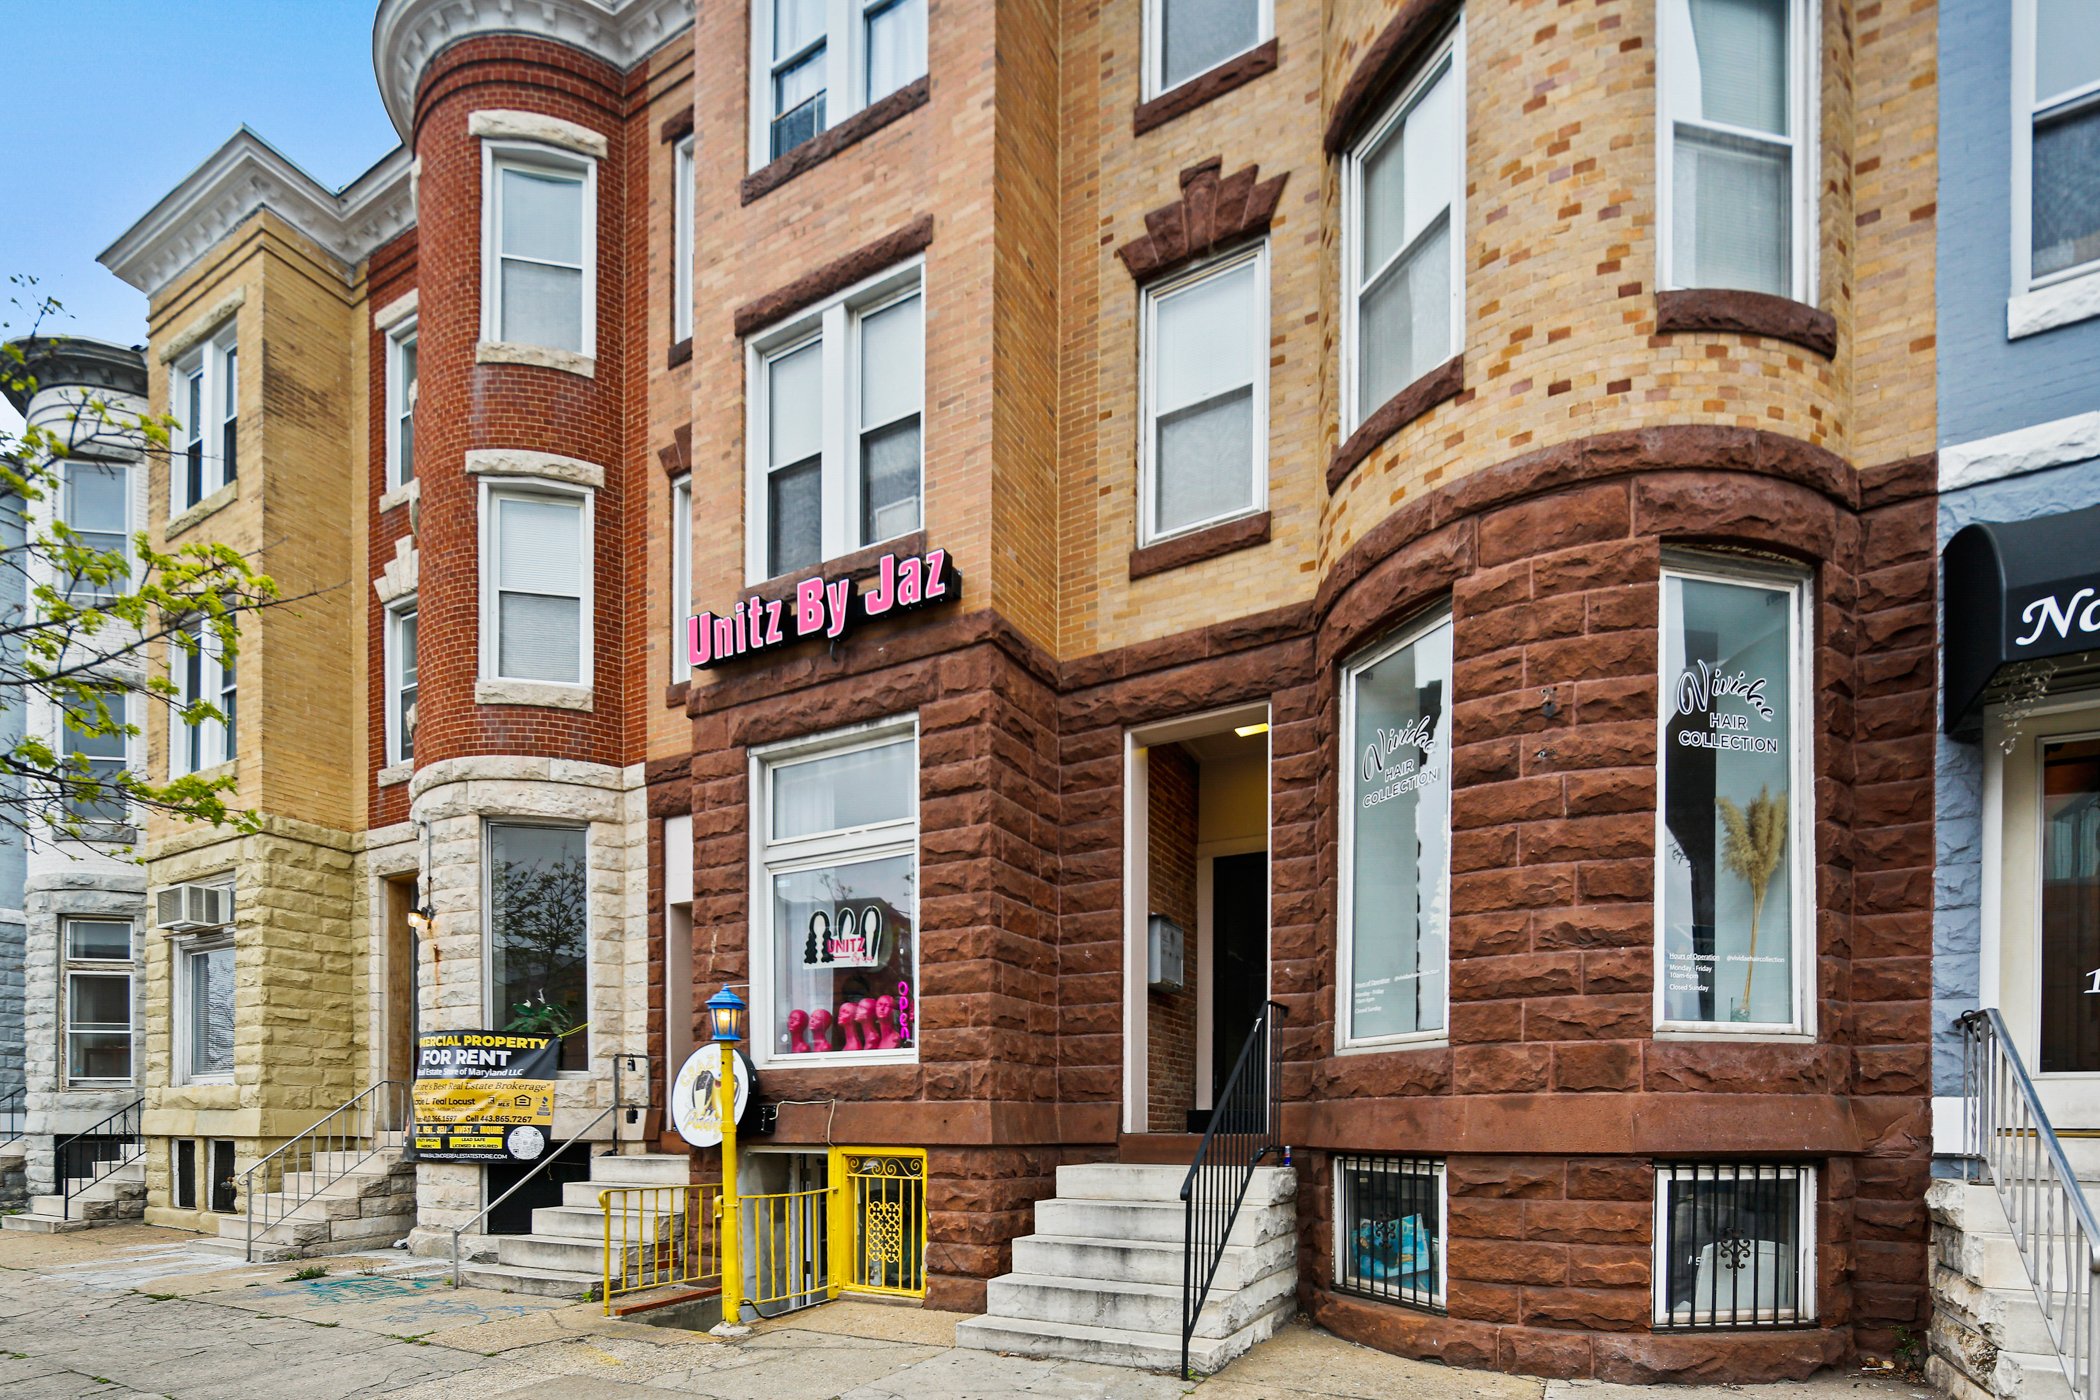 20 – 22 West 25th Street: 7 Unit Investment Building in Charles Village